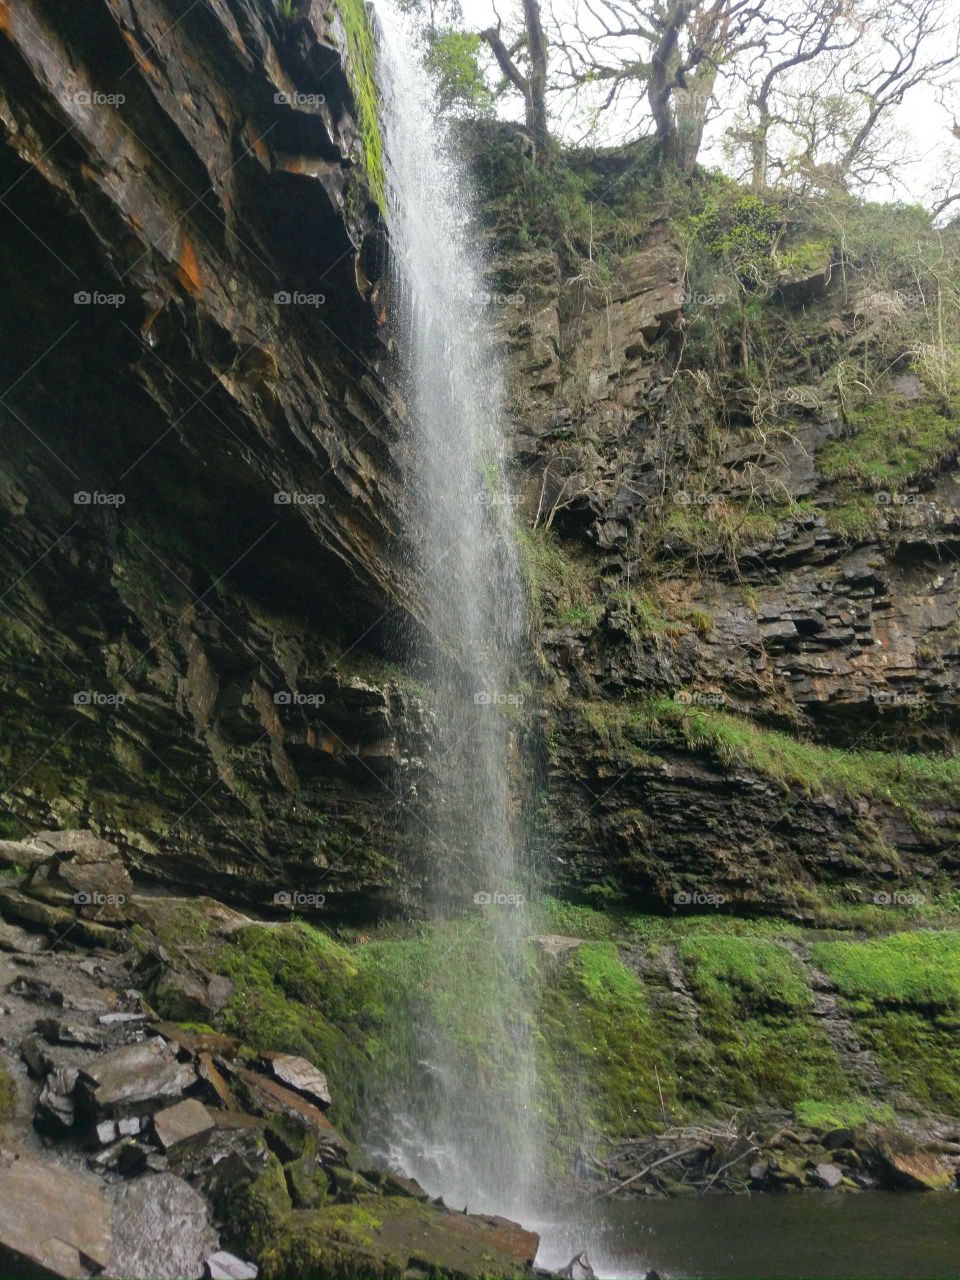 behind the waterfall of Henryd falls, south wales